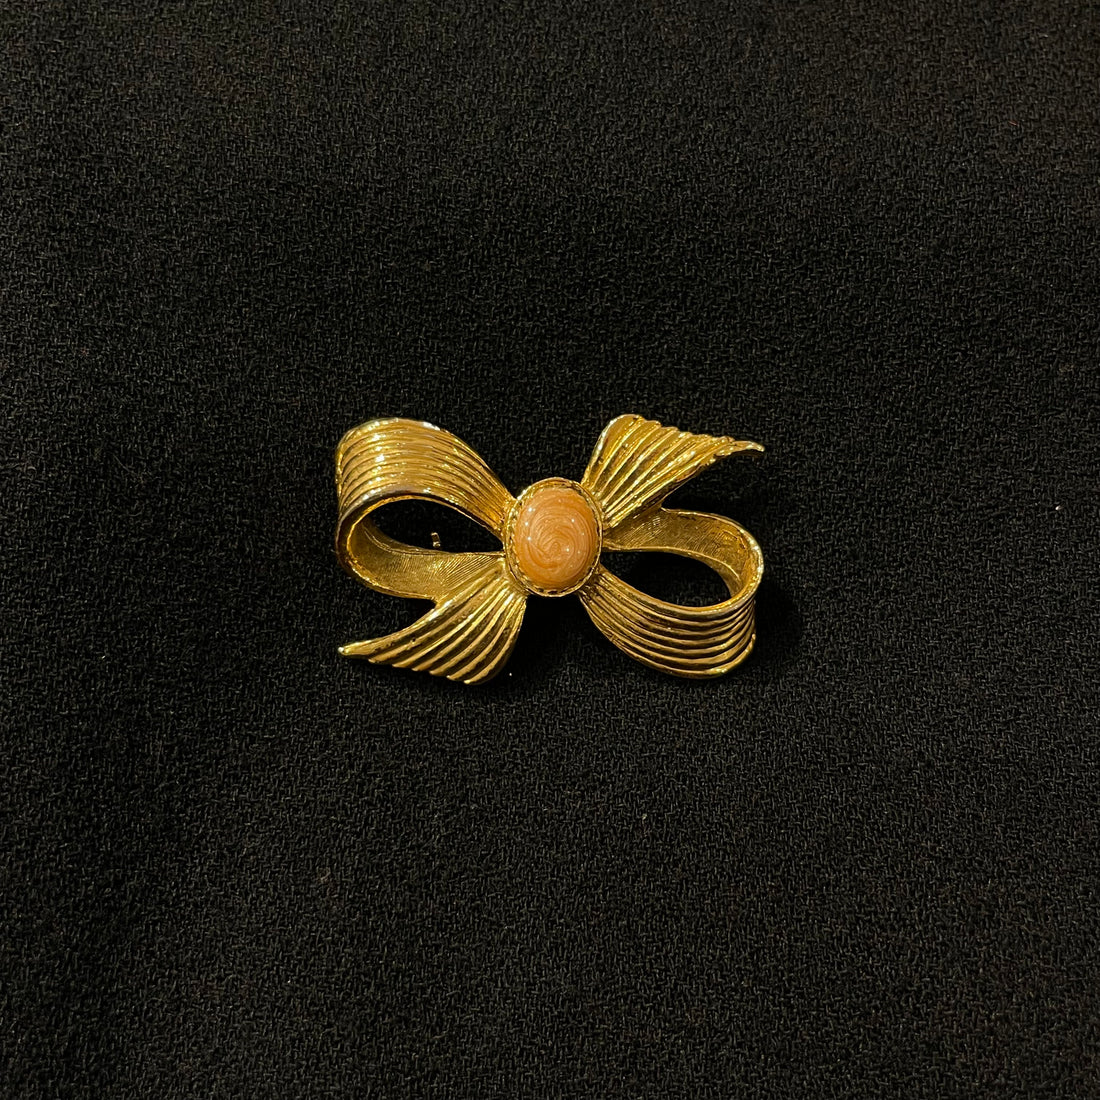 Vintage Criss-Crossed Bow with Gold-Swirled Center